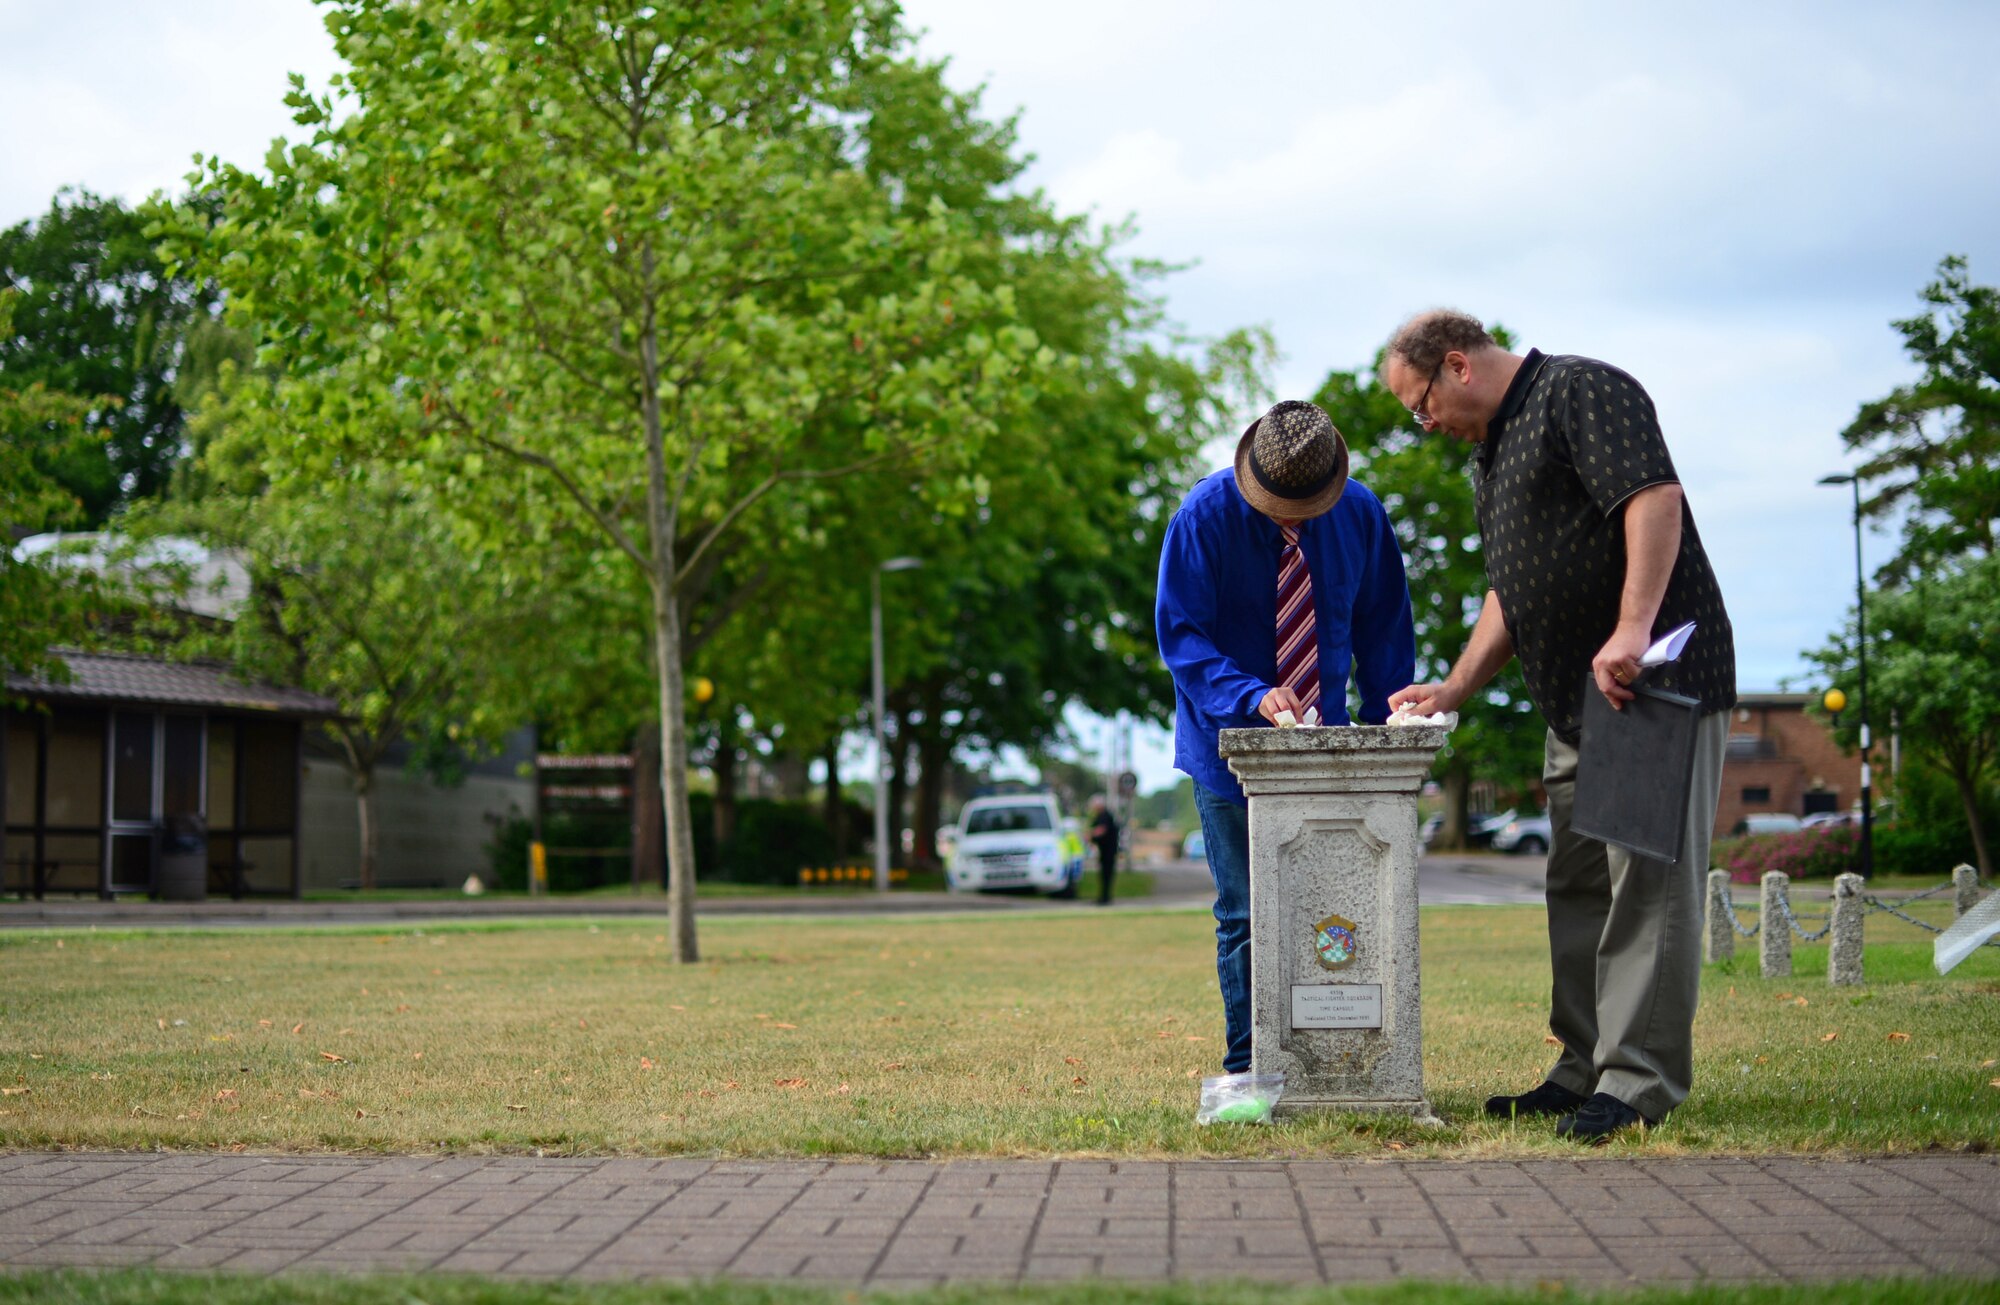 Josh Kelley, a former Air Force Junior ROTC member, and his father Terry, clean the surface of a memorial plaque dedicated to the 495th Tactical Fighter Squadron, a deactivated fighter squadron, at Royal Air Force Lakenheath, England, June 19, 2015. Josh replaced the old plaque with a more legible new one, donated by the base arts and crafts center, as a way to remember the fallen Airmen assigned to the 495th TFS. (U.S. Air Force photo by Senior Airman Erin O’Shea/Released) 